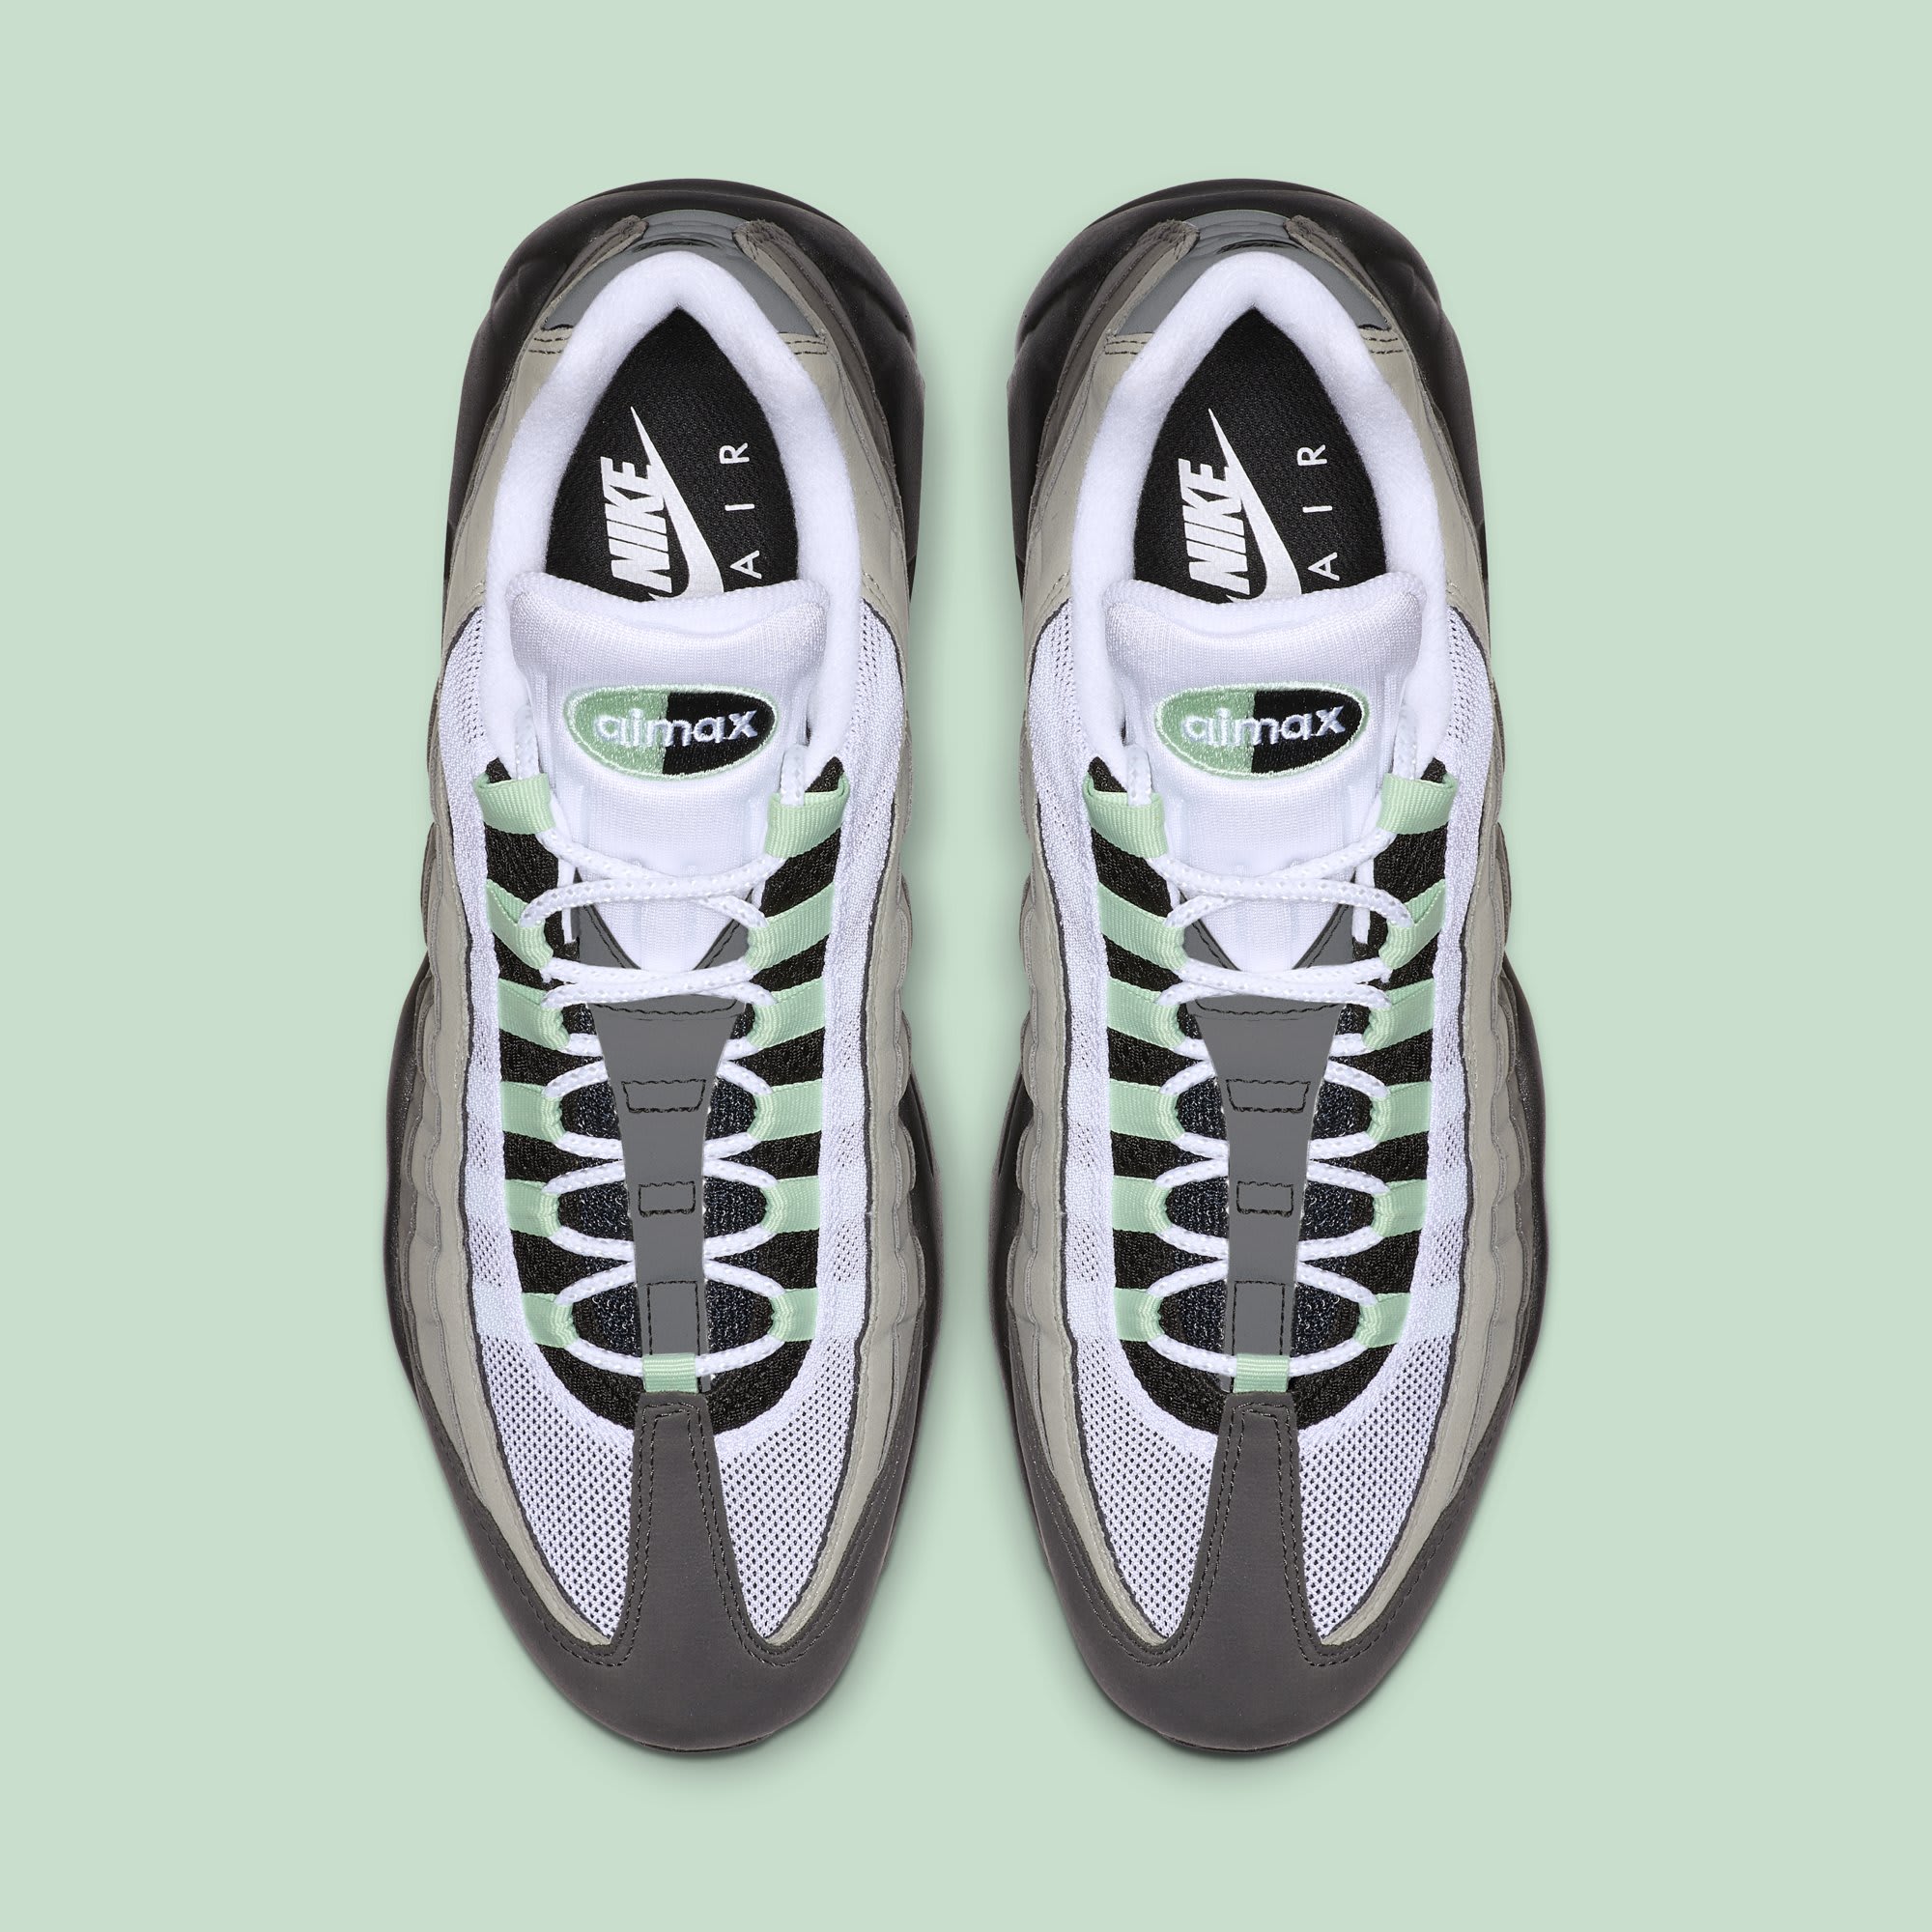 This Nike Air Max 95 Looks Like an OG Colorway | Complex